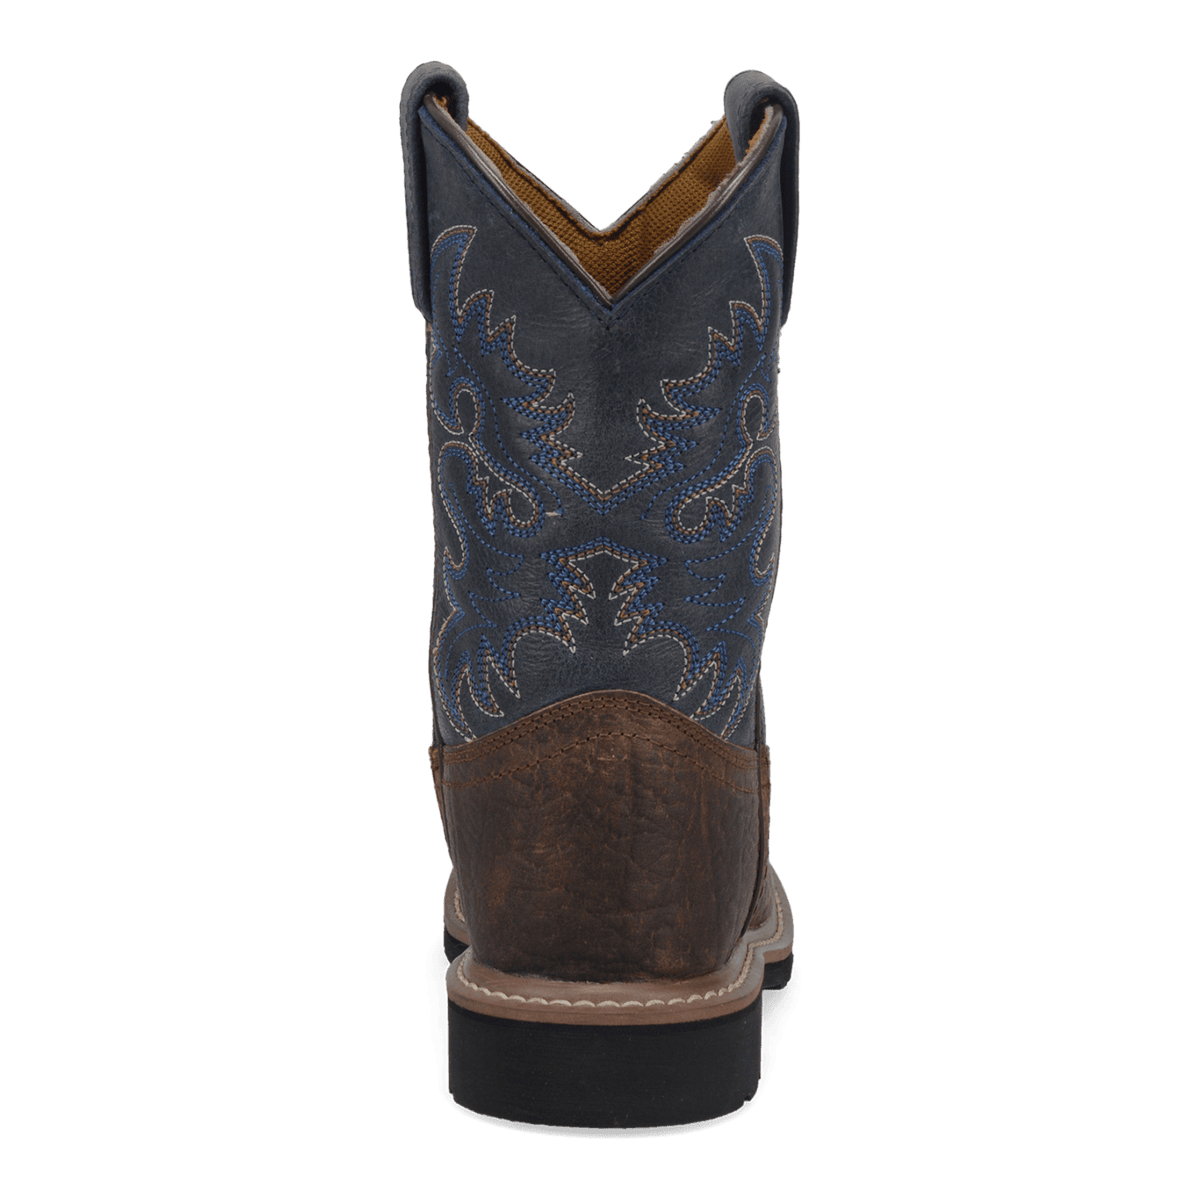 BRANTLEY LEATHER CHILDREN'S BOOT Image